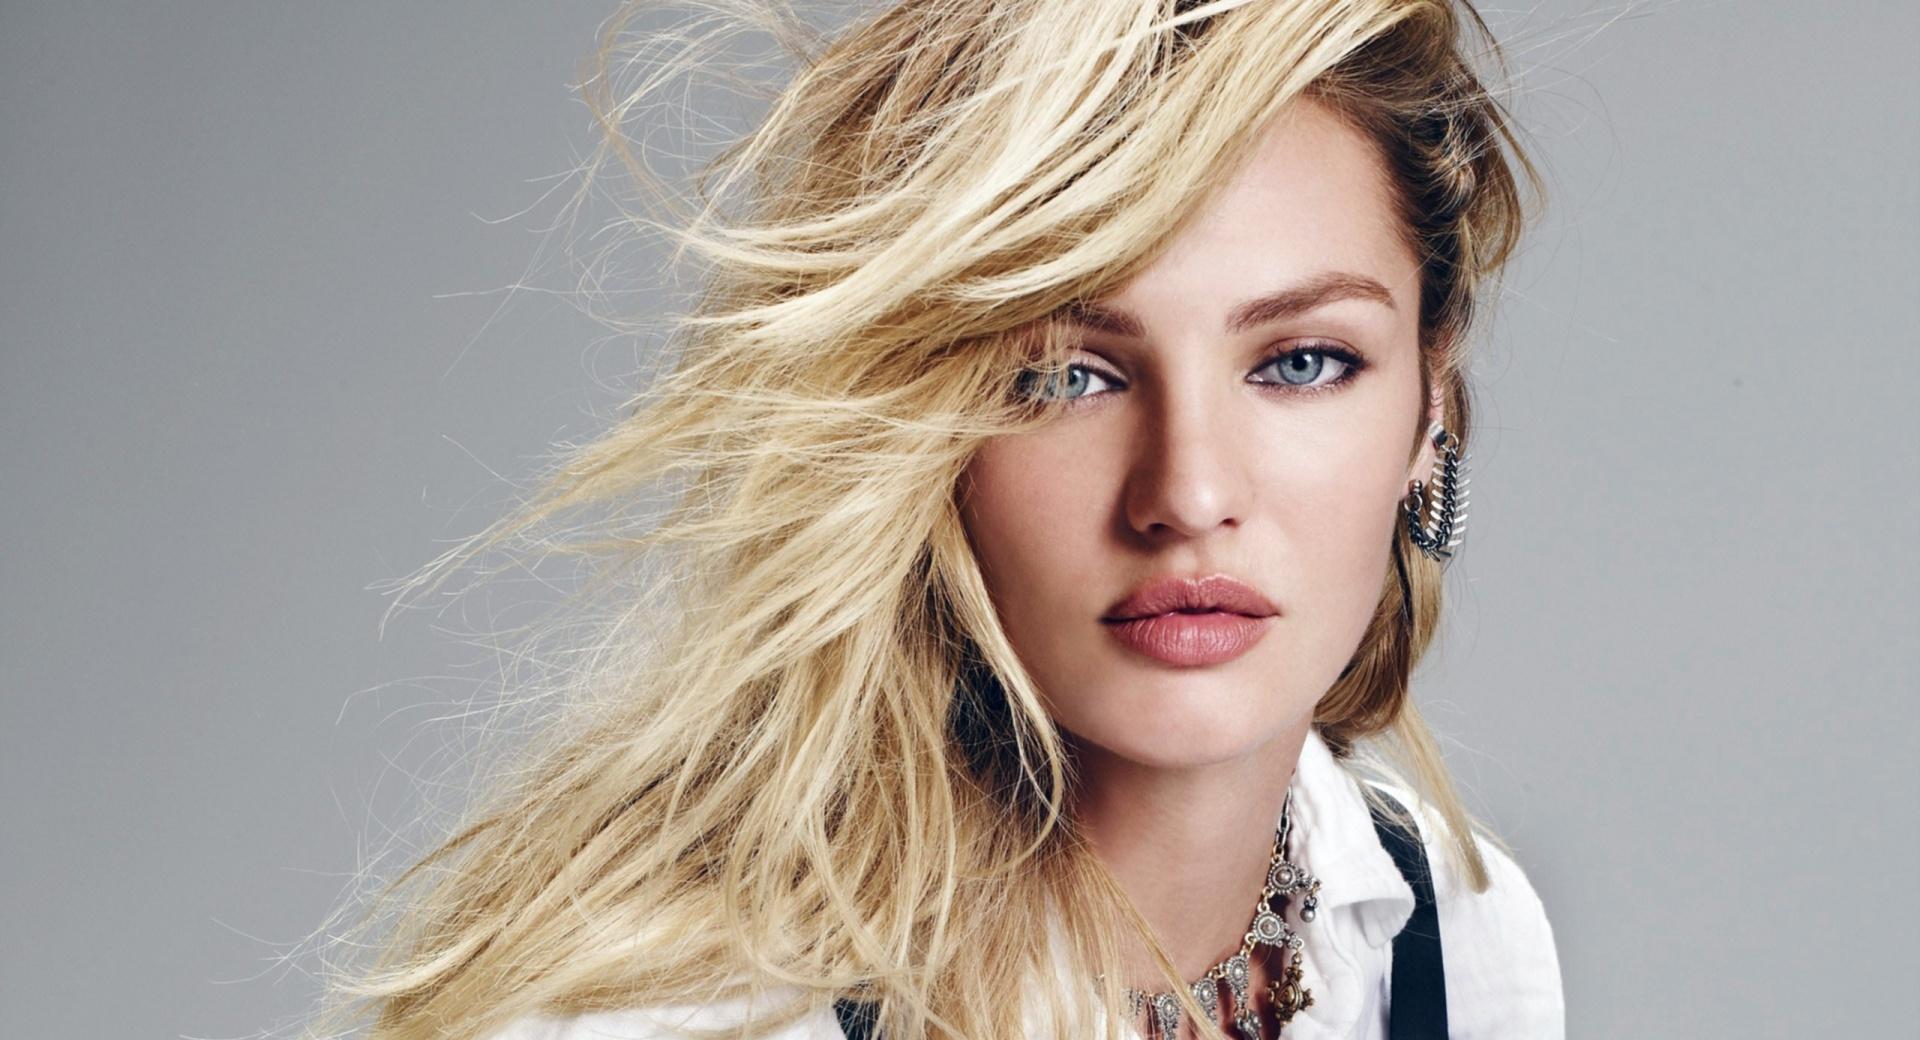 Candice Swanepoel Portrait wallpapers HD quality